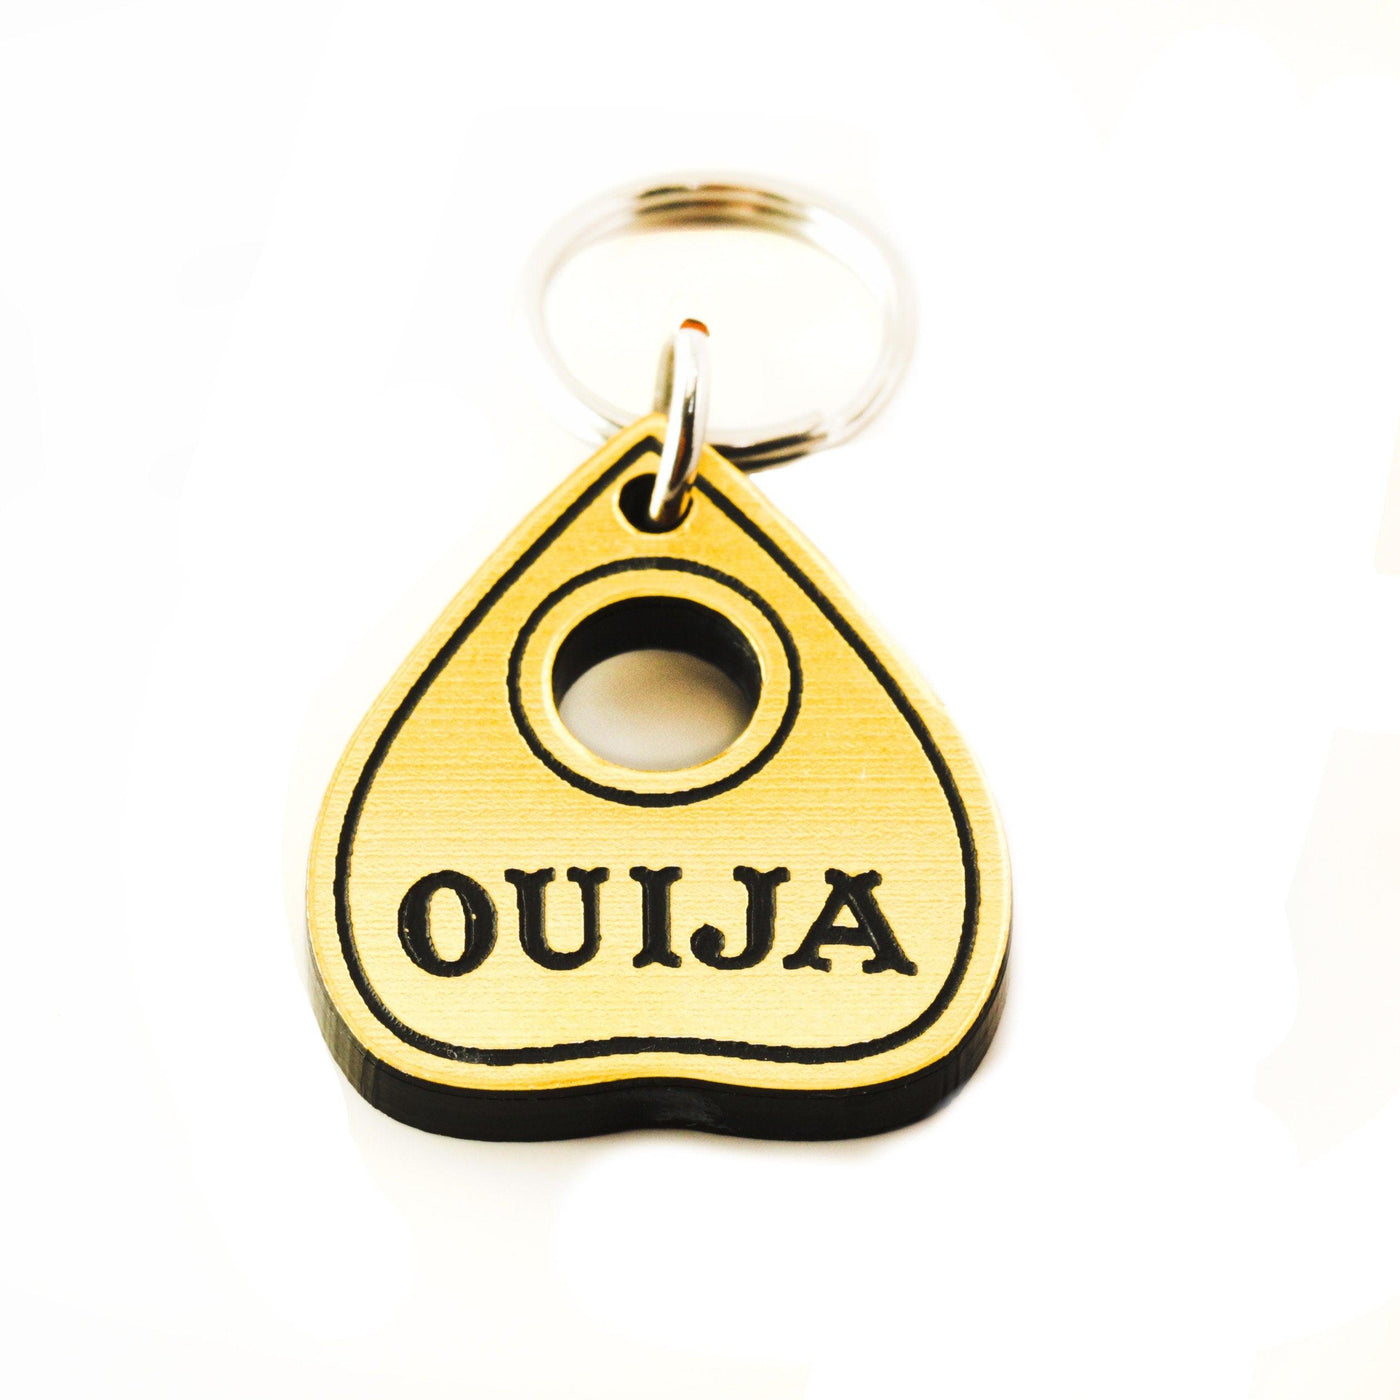 Ouija Personalized pet tag, Ouija Planchette, Personalized Pet ID Tag, Spirit Friendly, D Tag and Dog ID Tag, Witch Pet Tag, Spooky Pet Tag